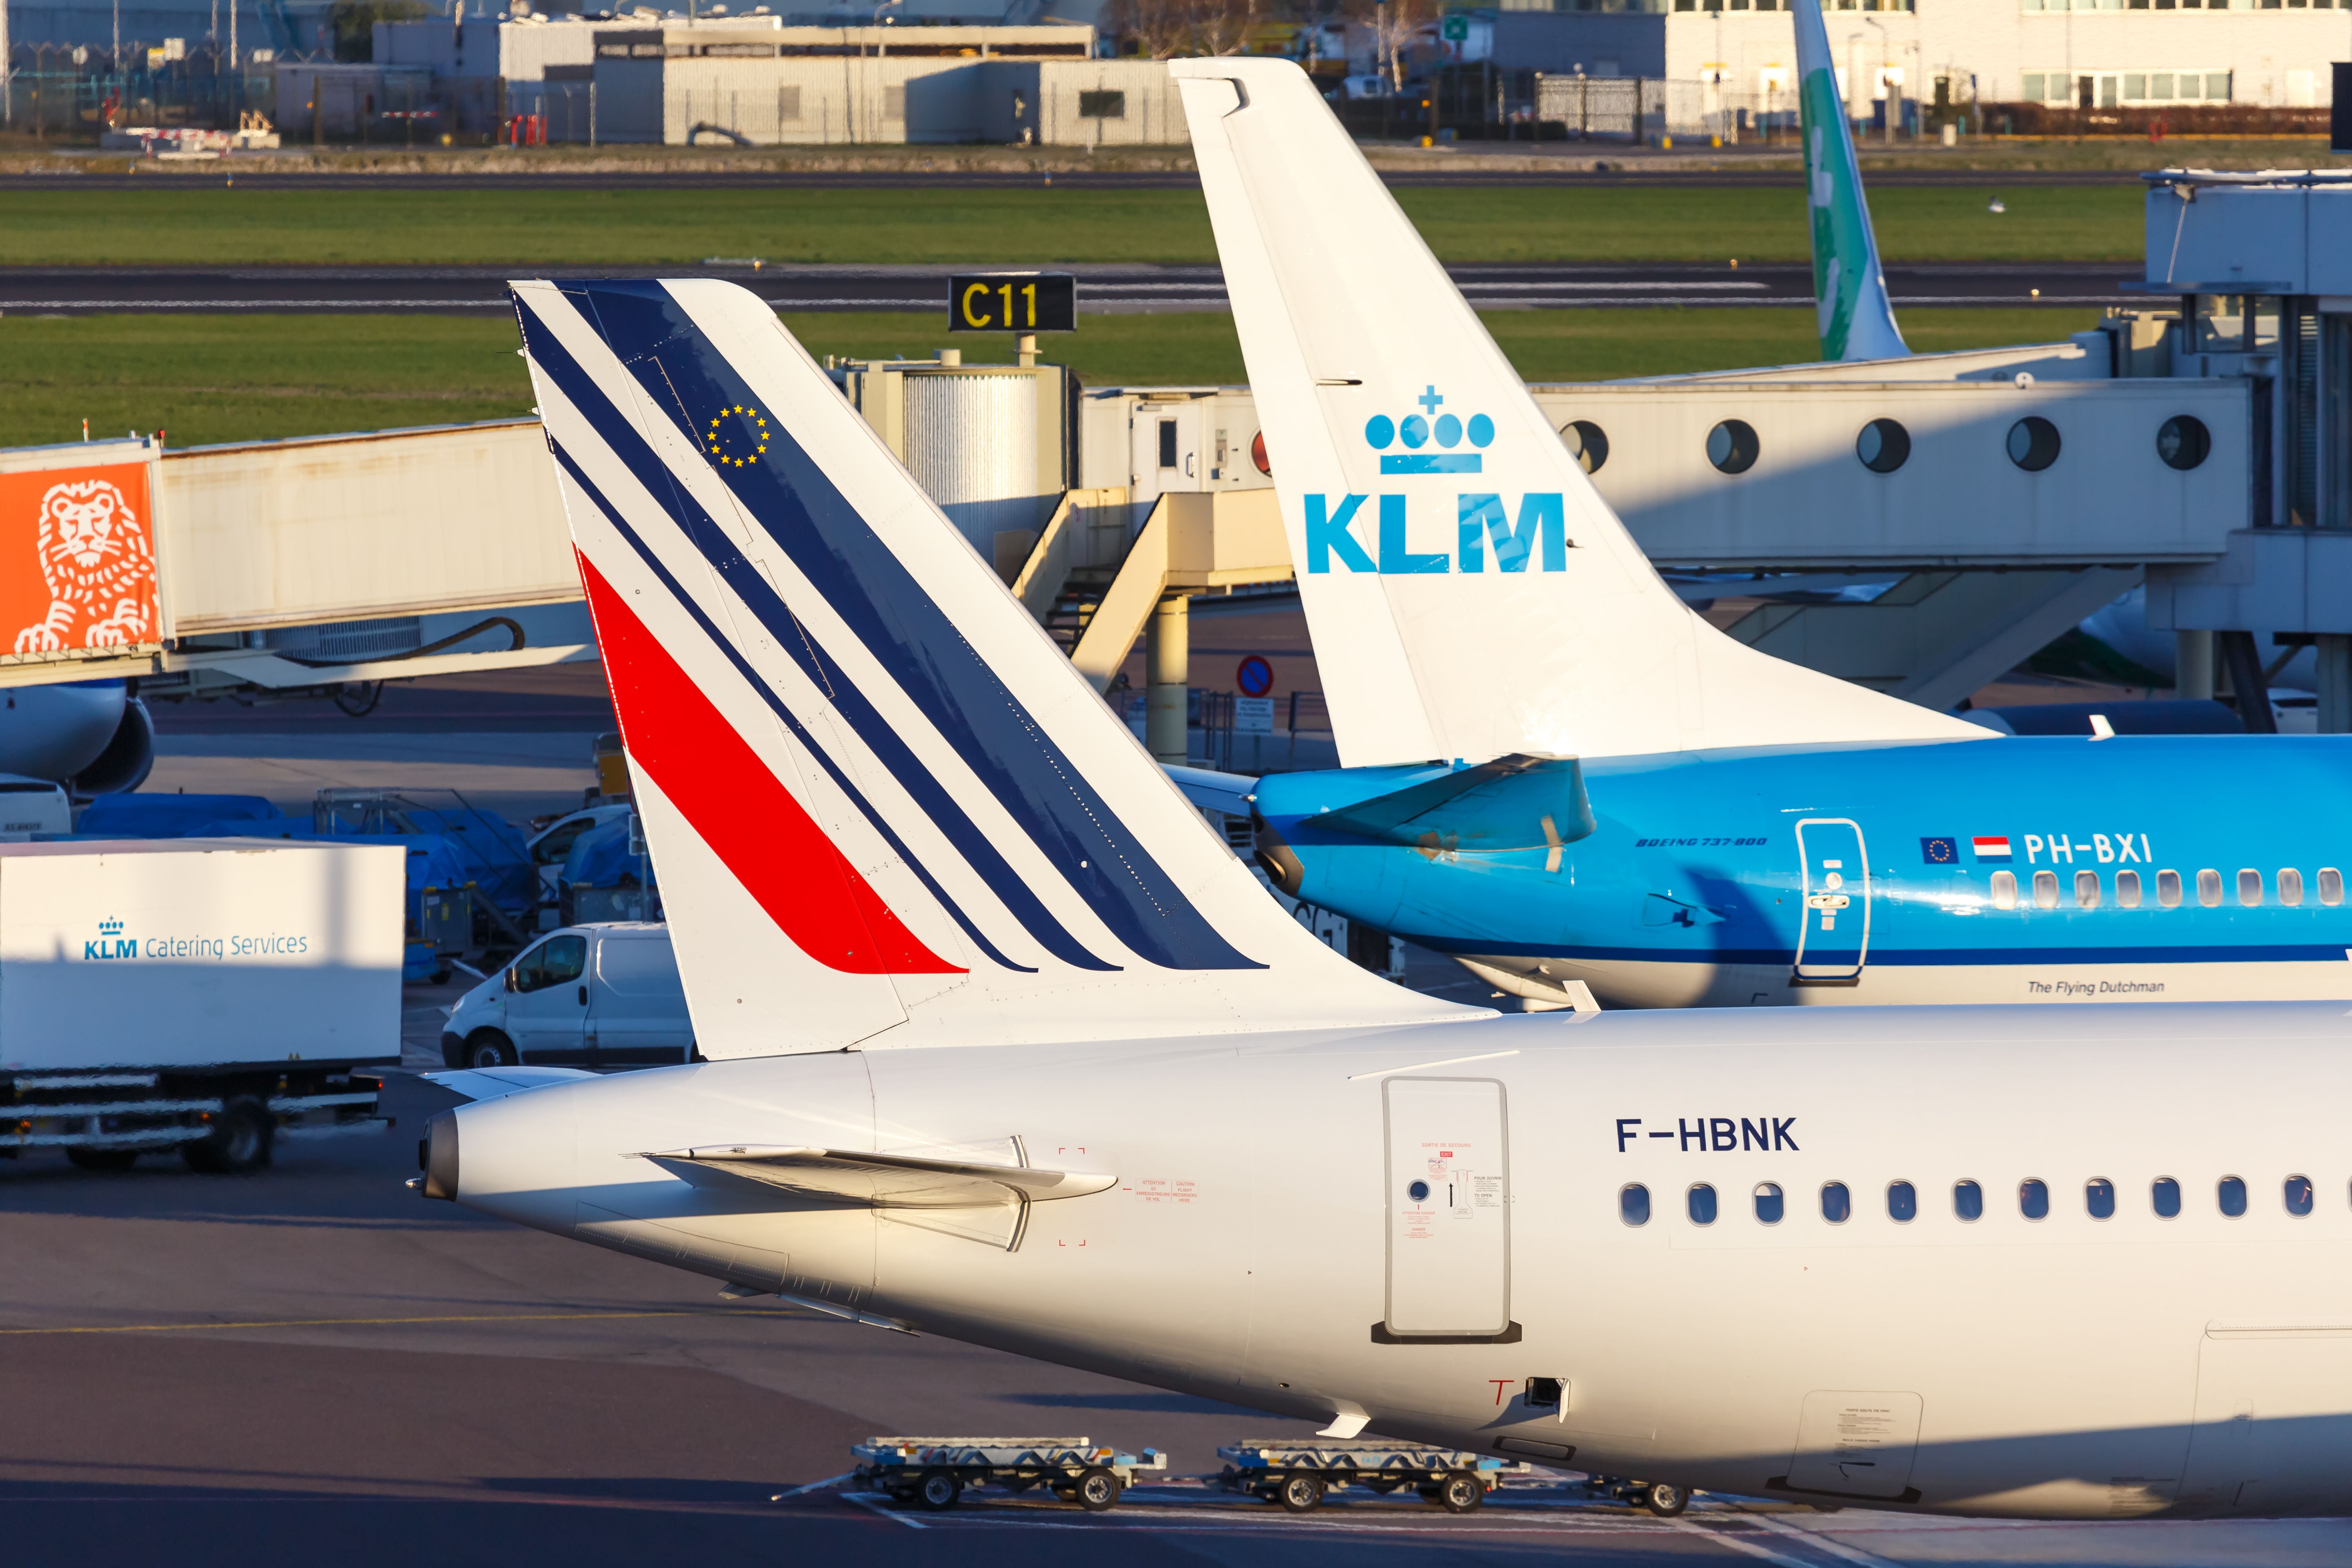 Air France and KLM aircraft tails